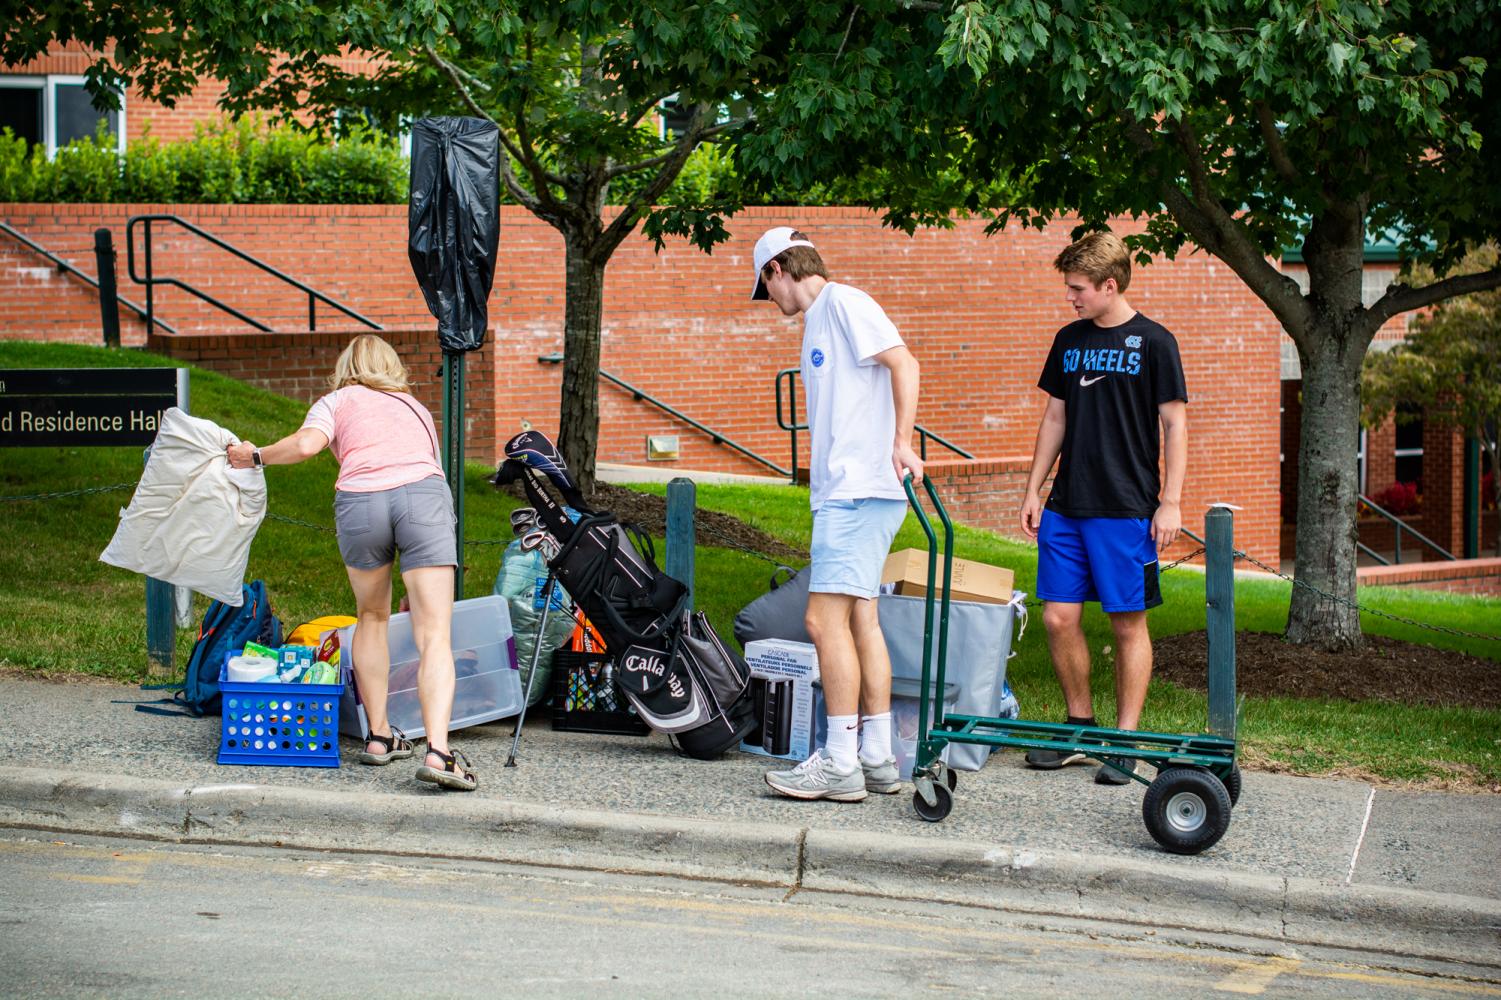 Movein day brings new faces to campus The Appalachian